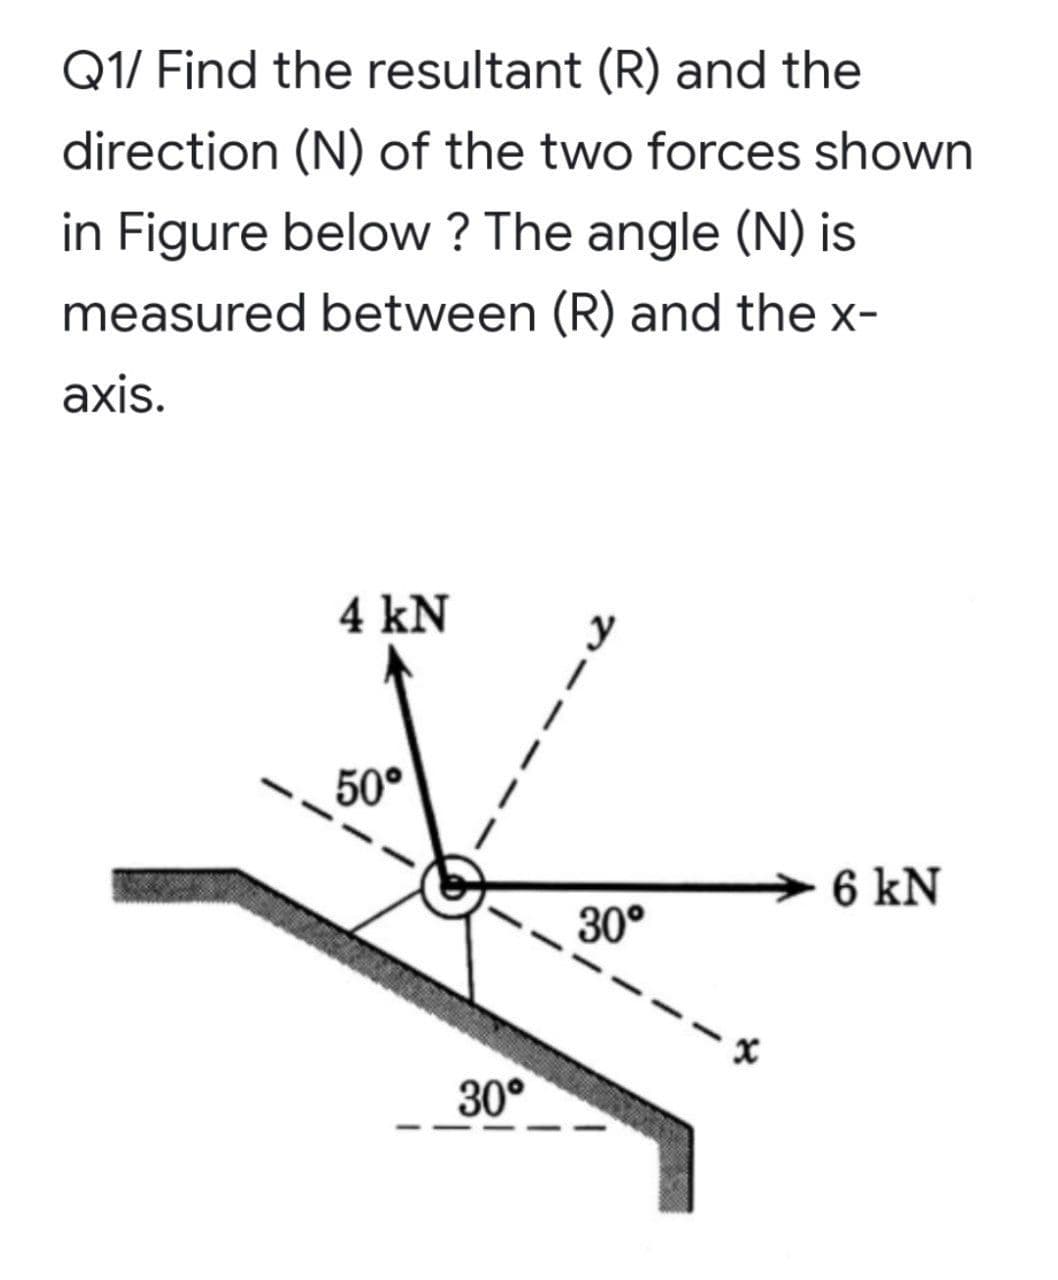 Q1/ Find the resultant (R) and the
direction (N) of the two forces shown
in Figure below ? The angle (N) is
measured between (R) and the x-
axis.
4 kN
y
50°
6 kN
30°
30°
